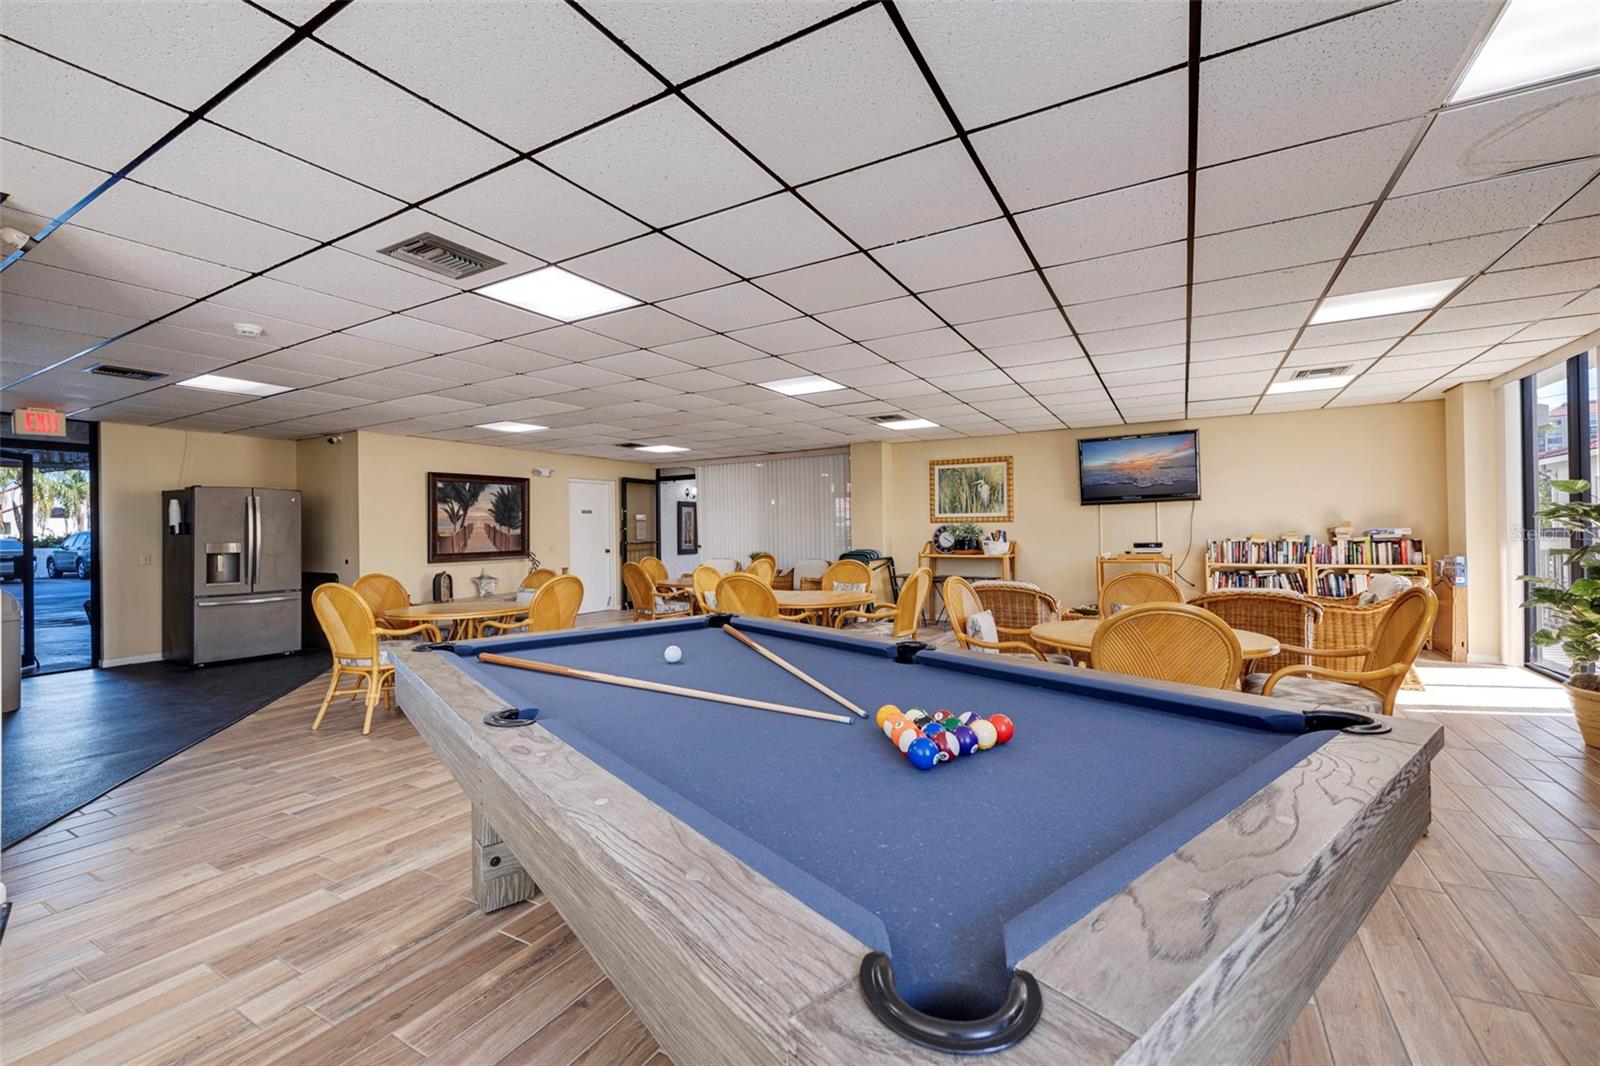 PLAY POOL IN THE SOCIAL.RECREATION ROOM